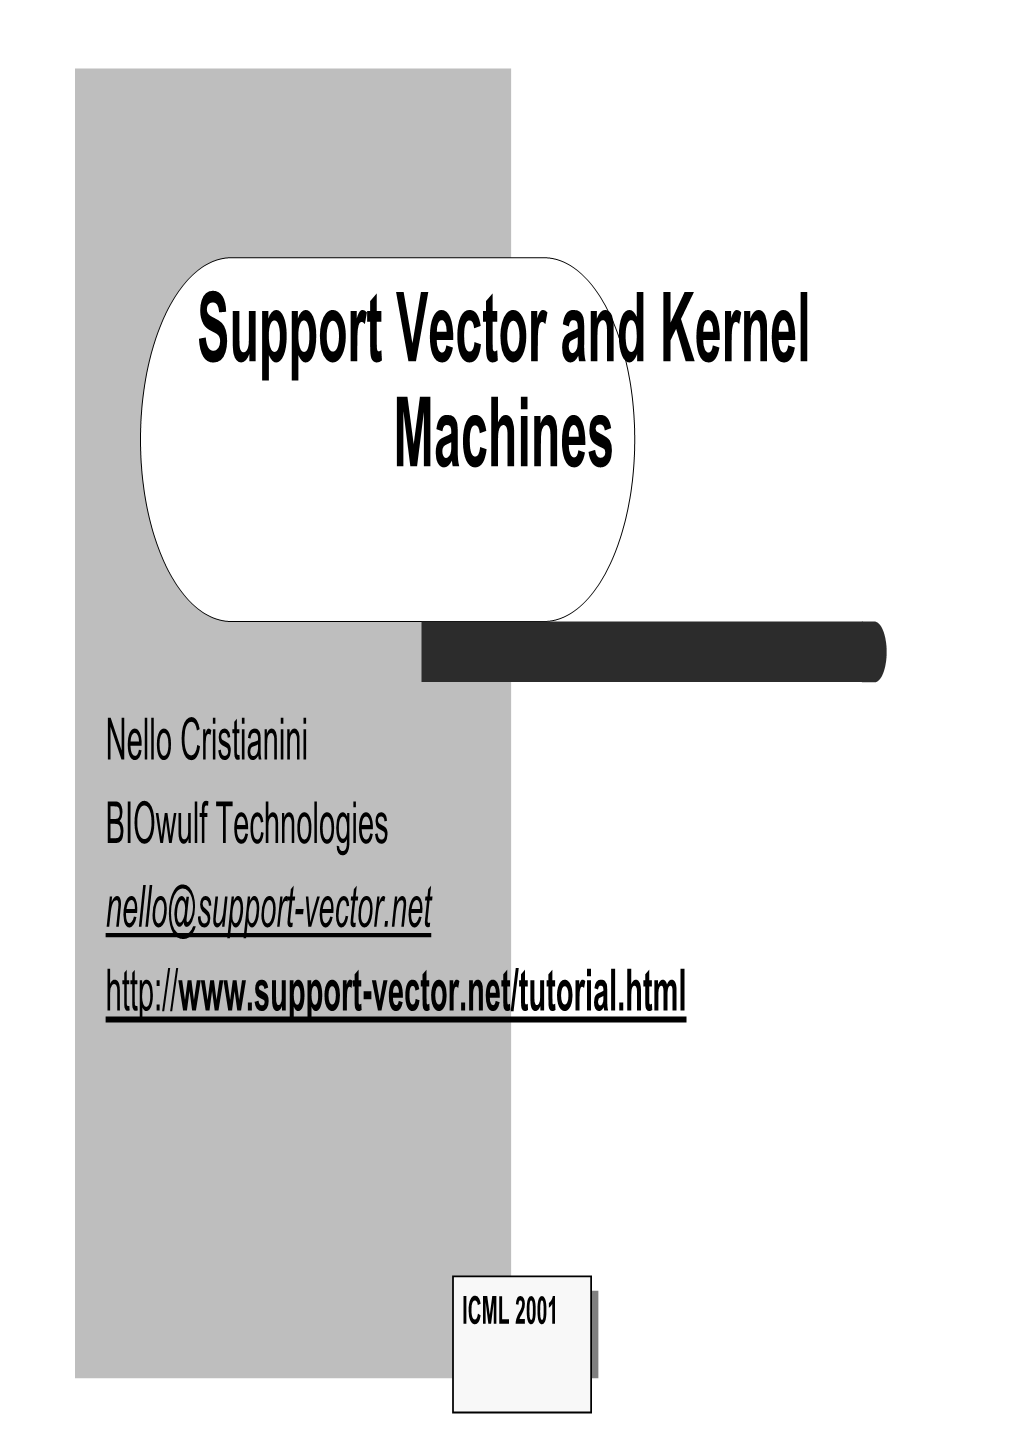 Support Vector and Kernel Machines